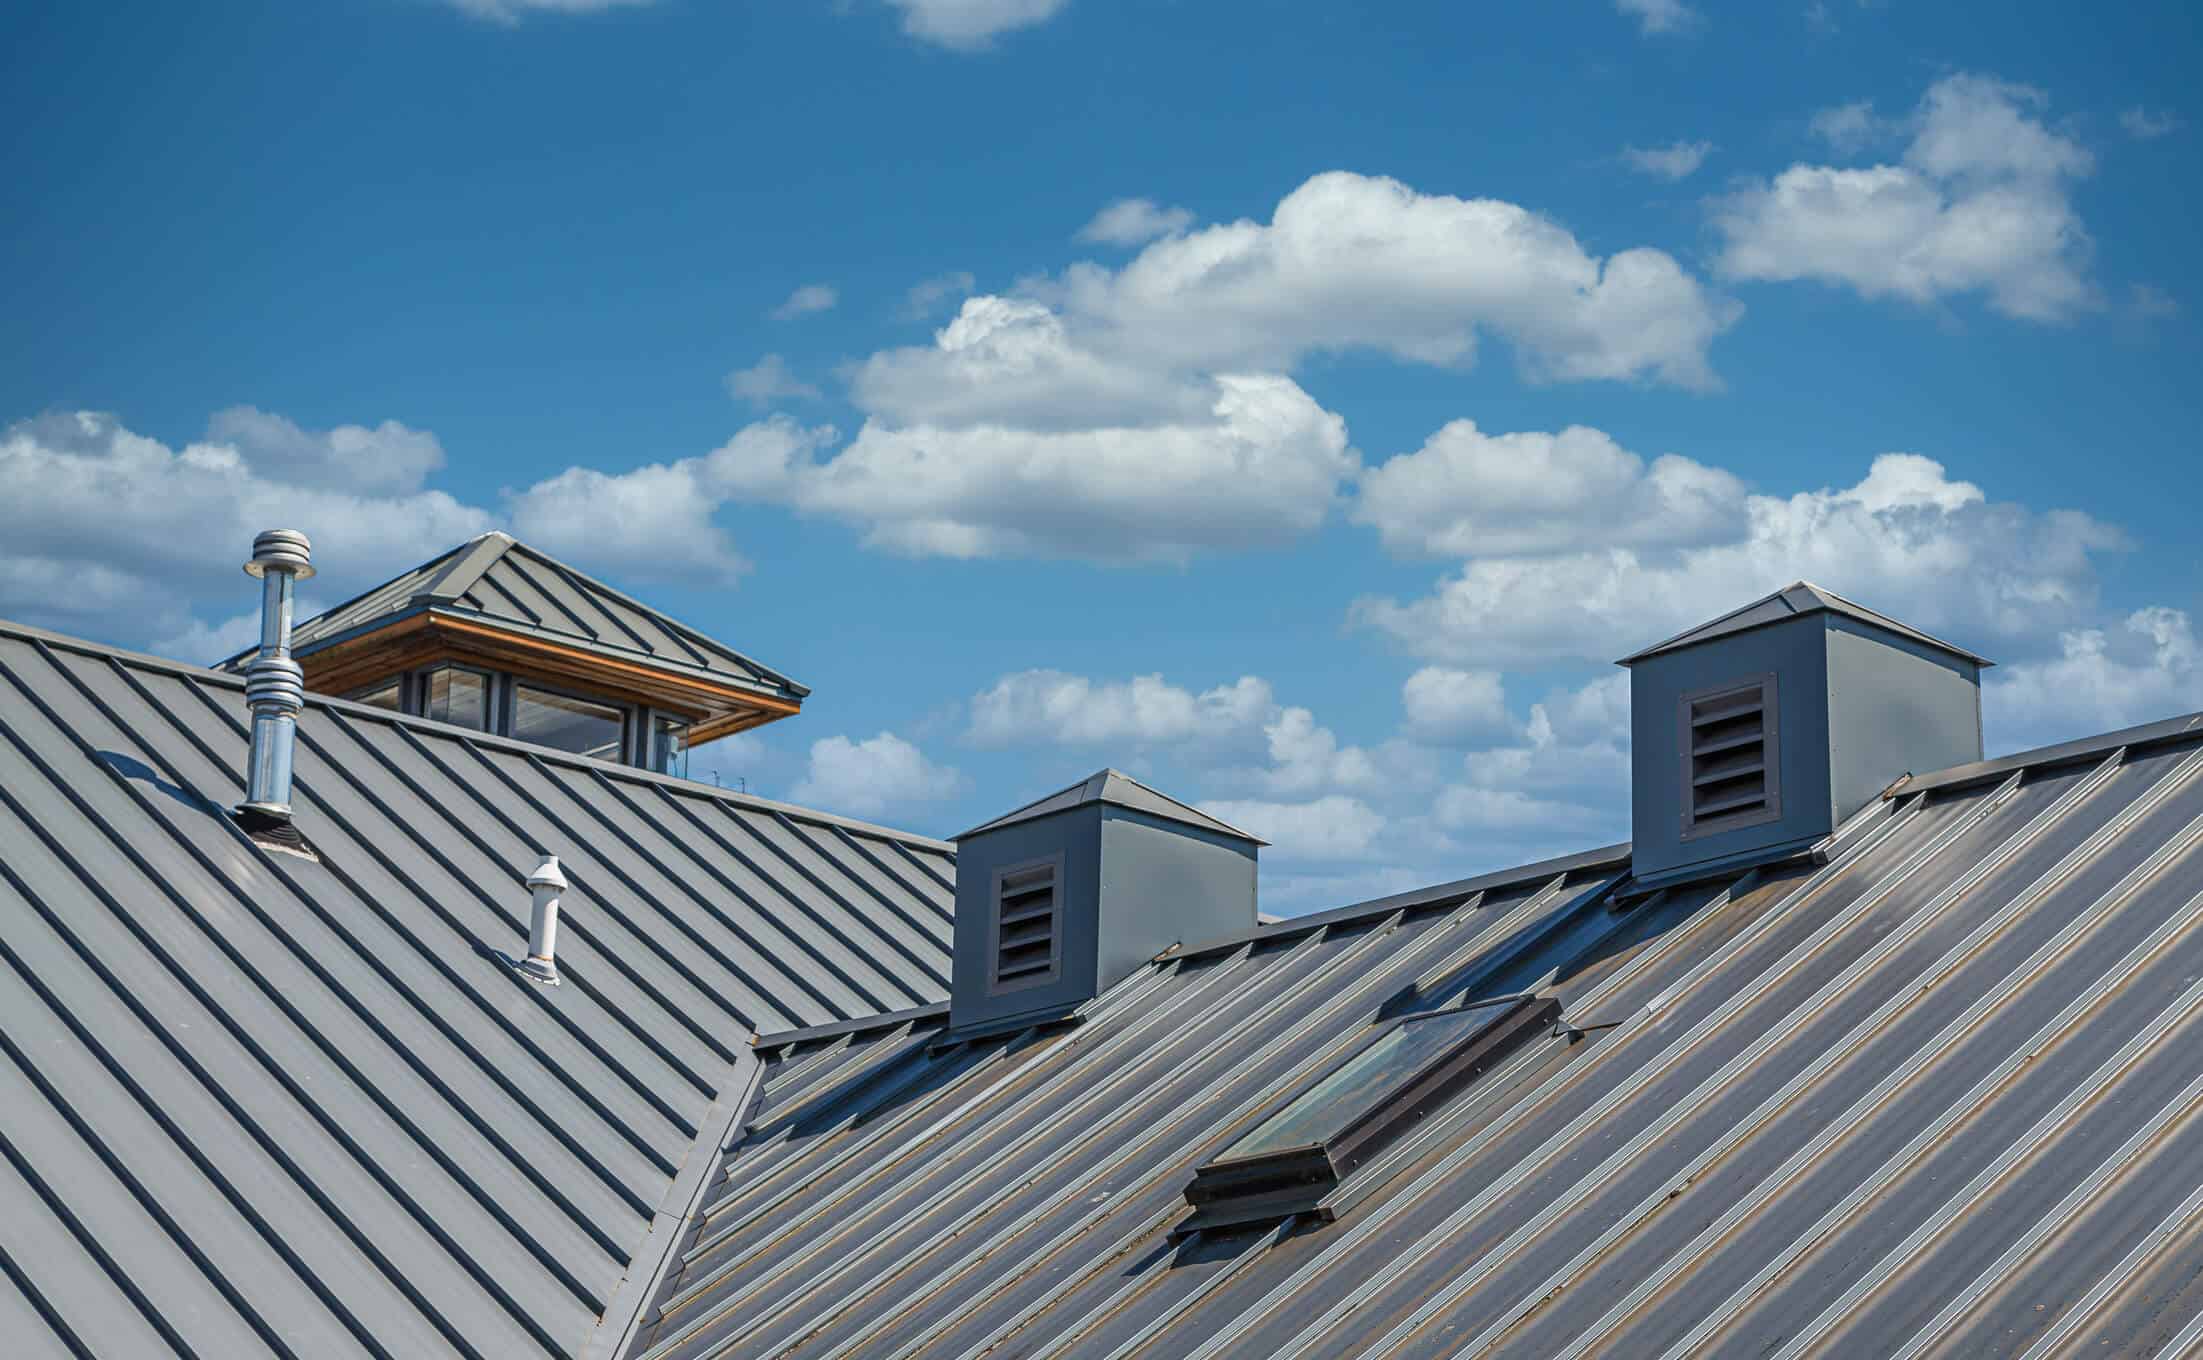 industrial roofing types